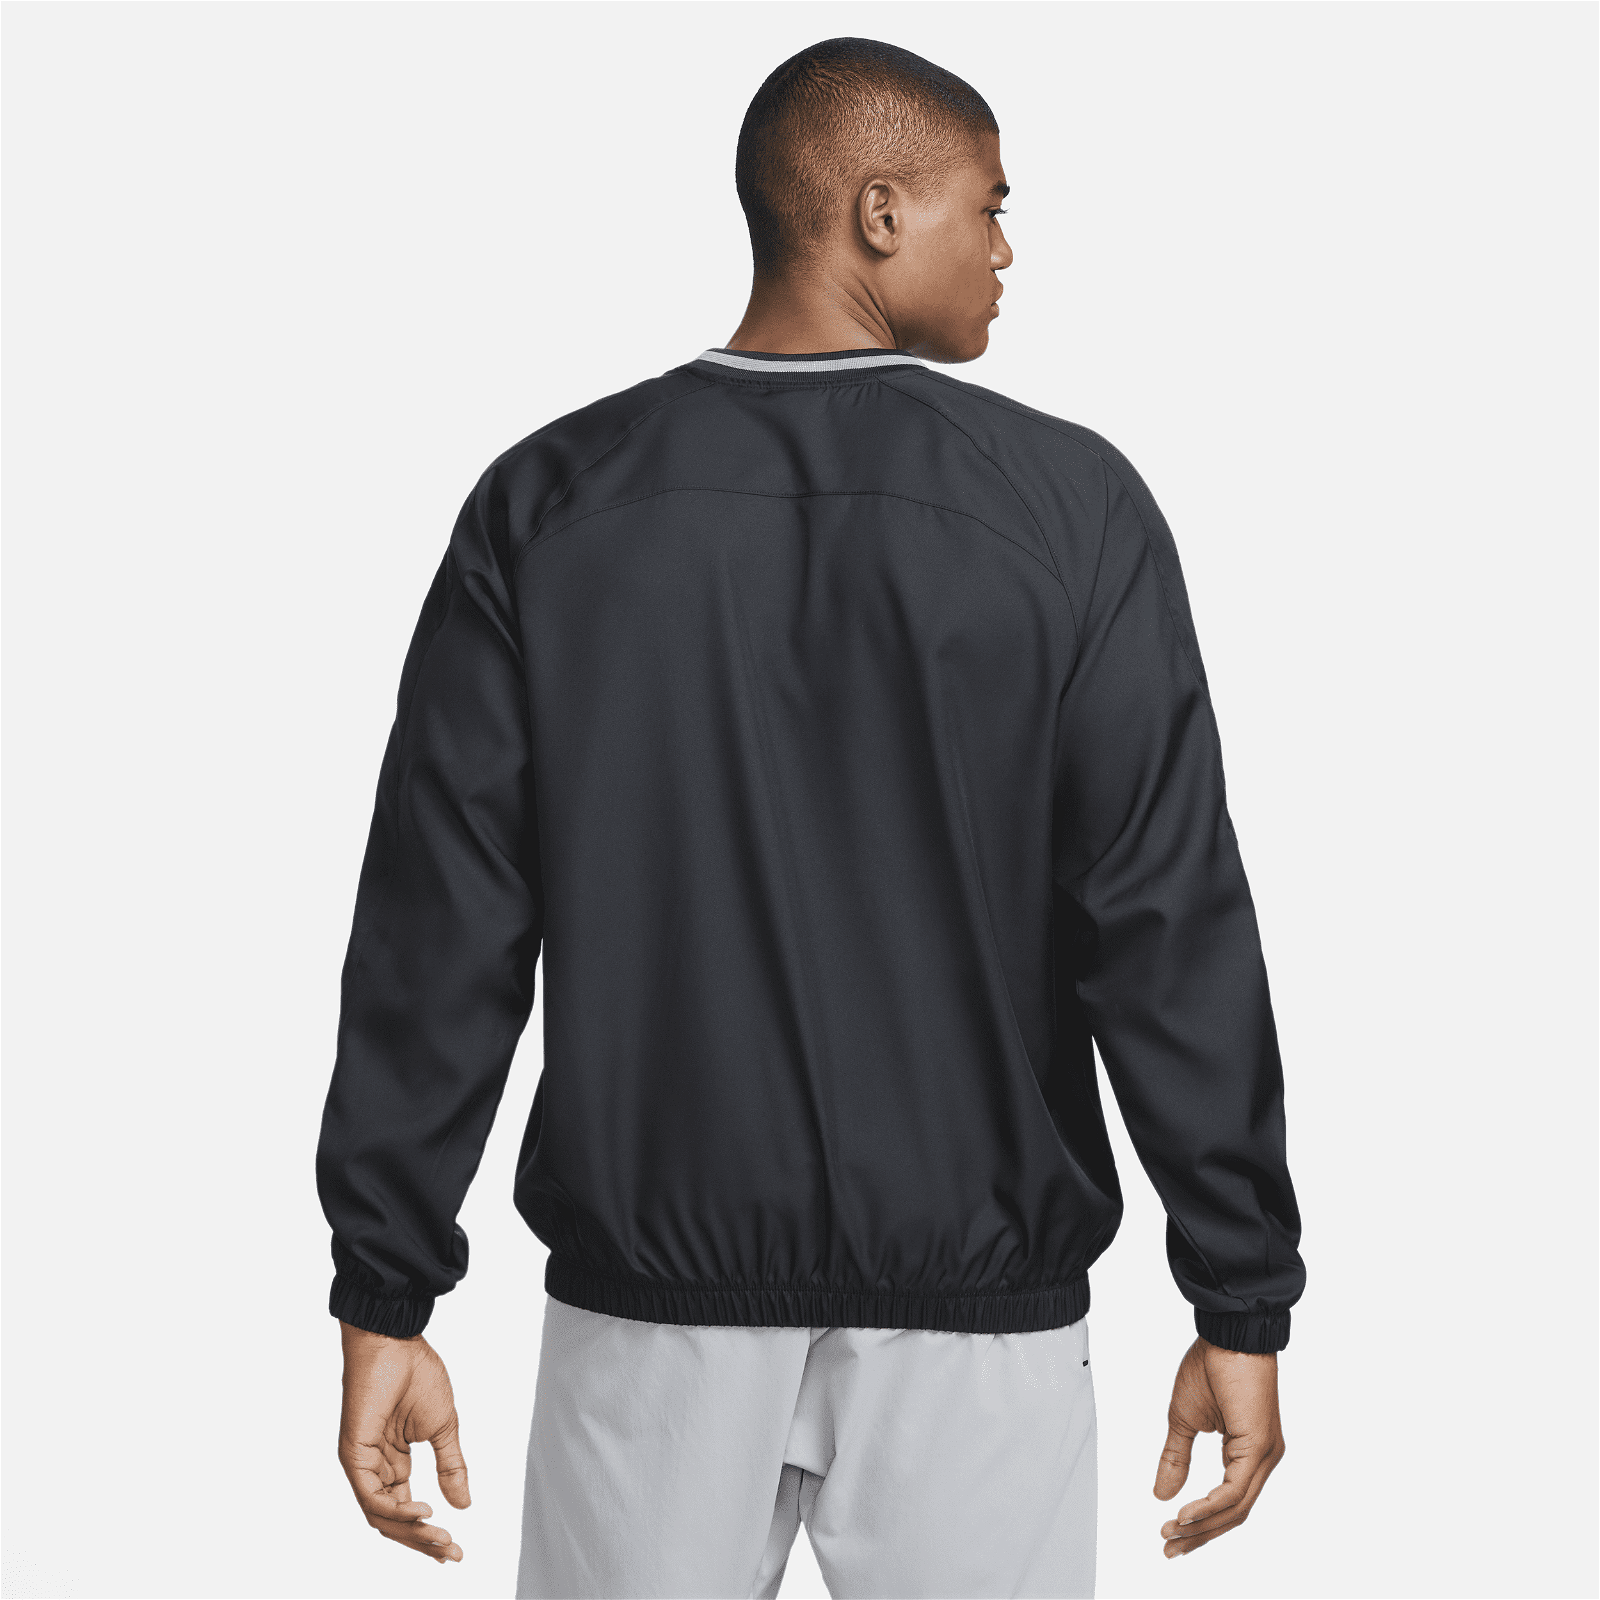 Dri-Fit  Academy Shell Top